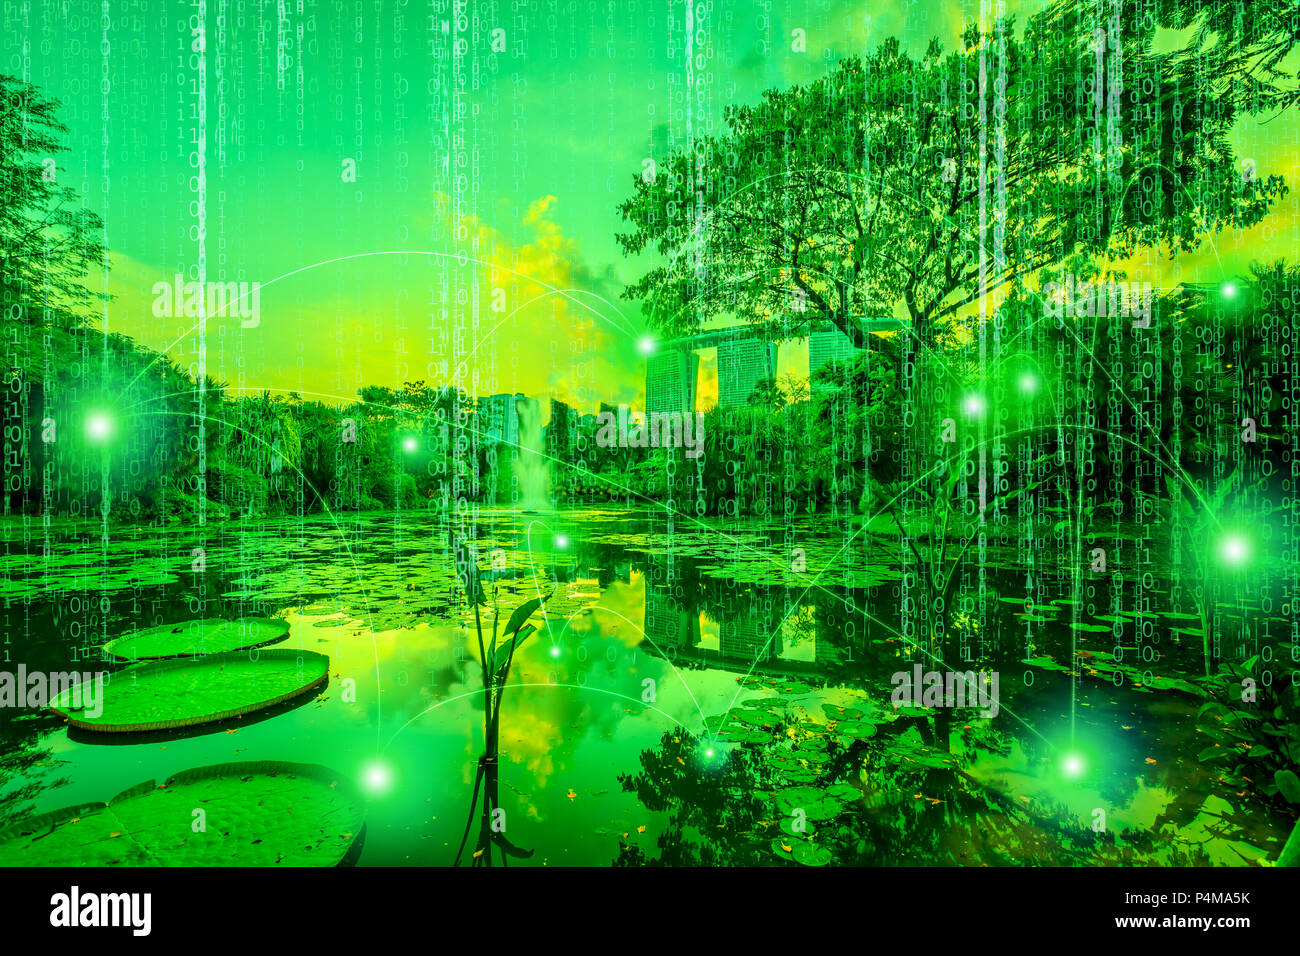 Concept of digital connection and transactions connectivity between digital trees of a computer grove. Virtual skyline with matrix sky background in green color. Concept of virual money and bitcoin. Stock Photo